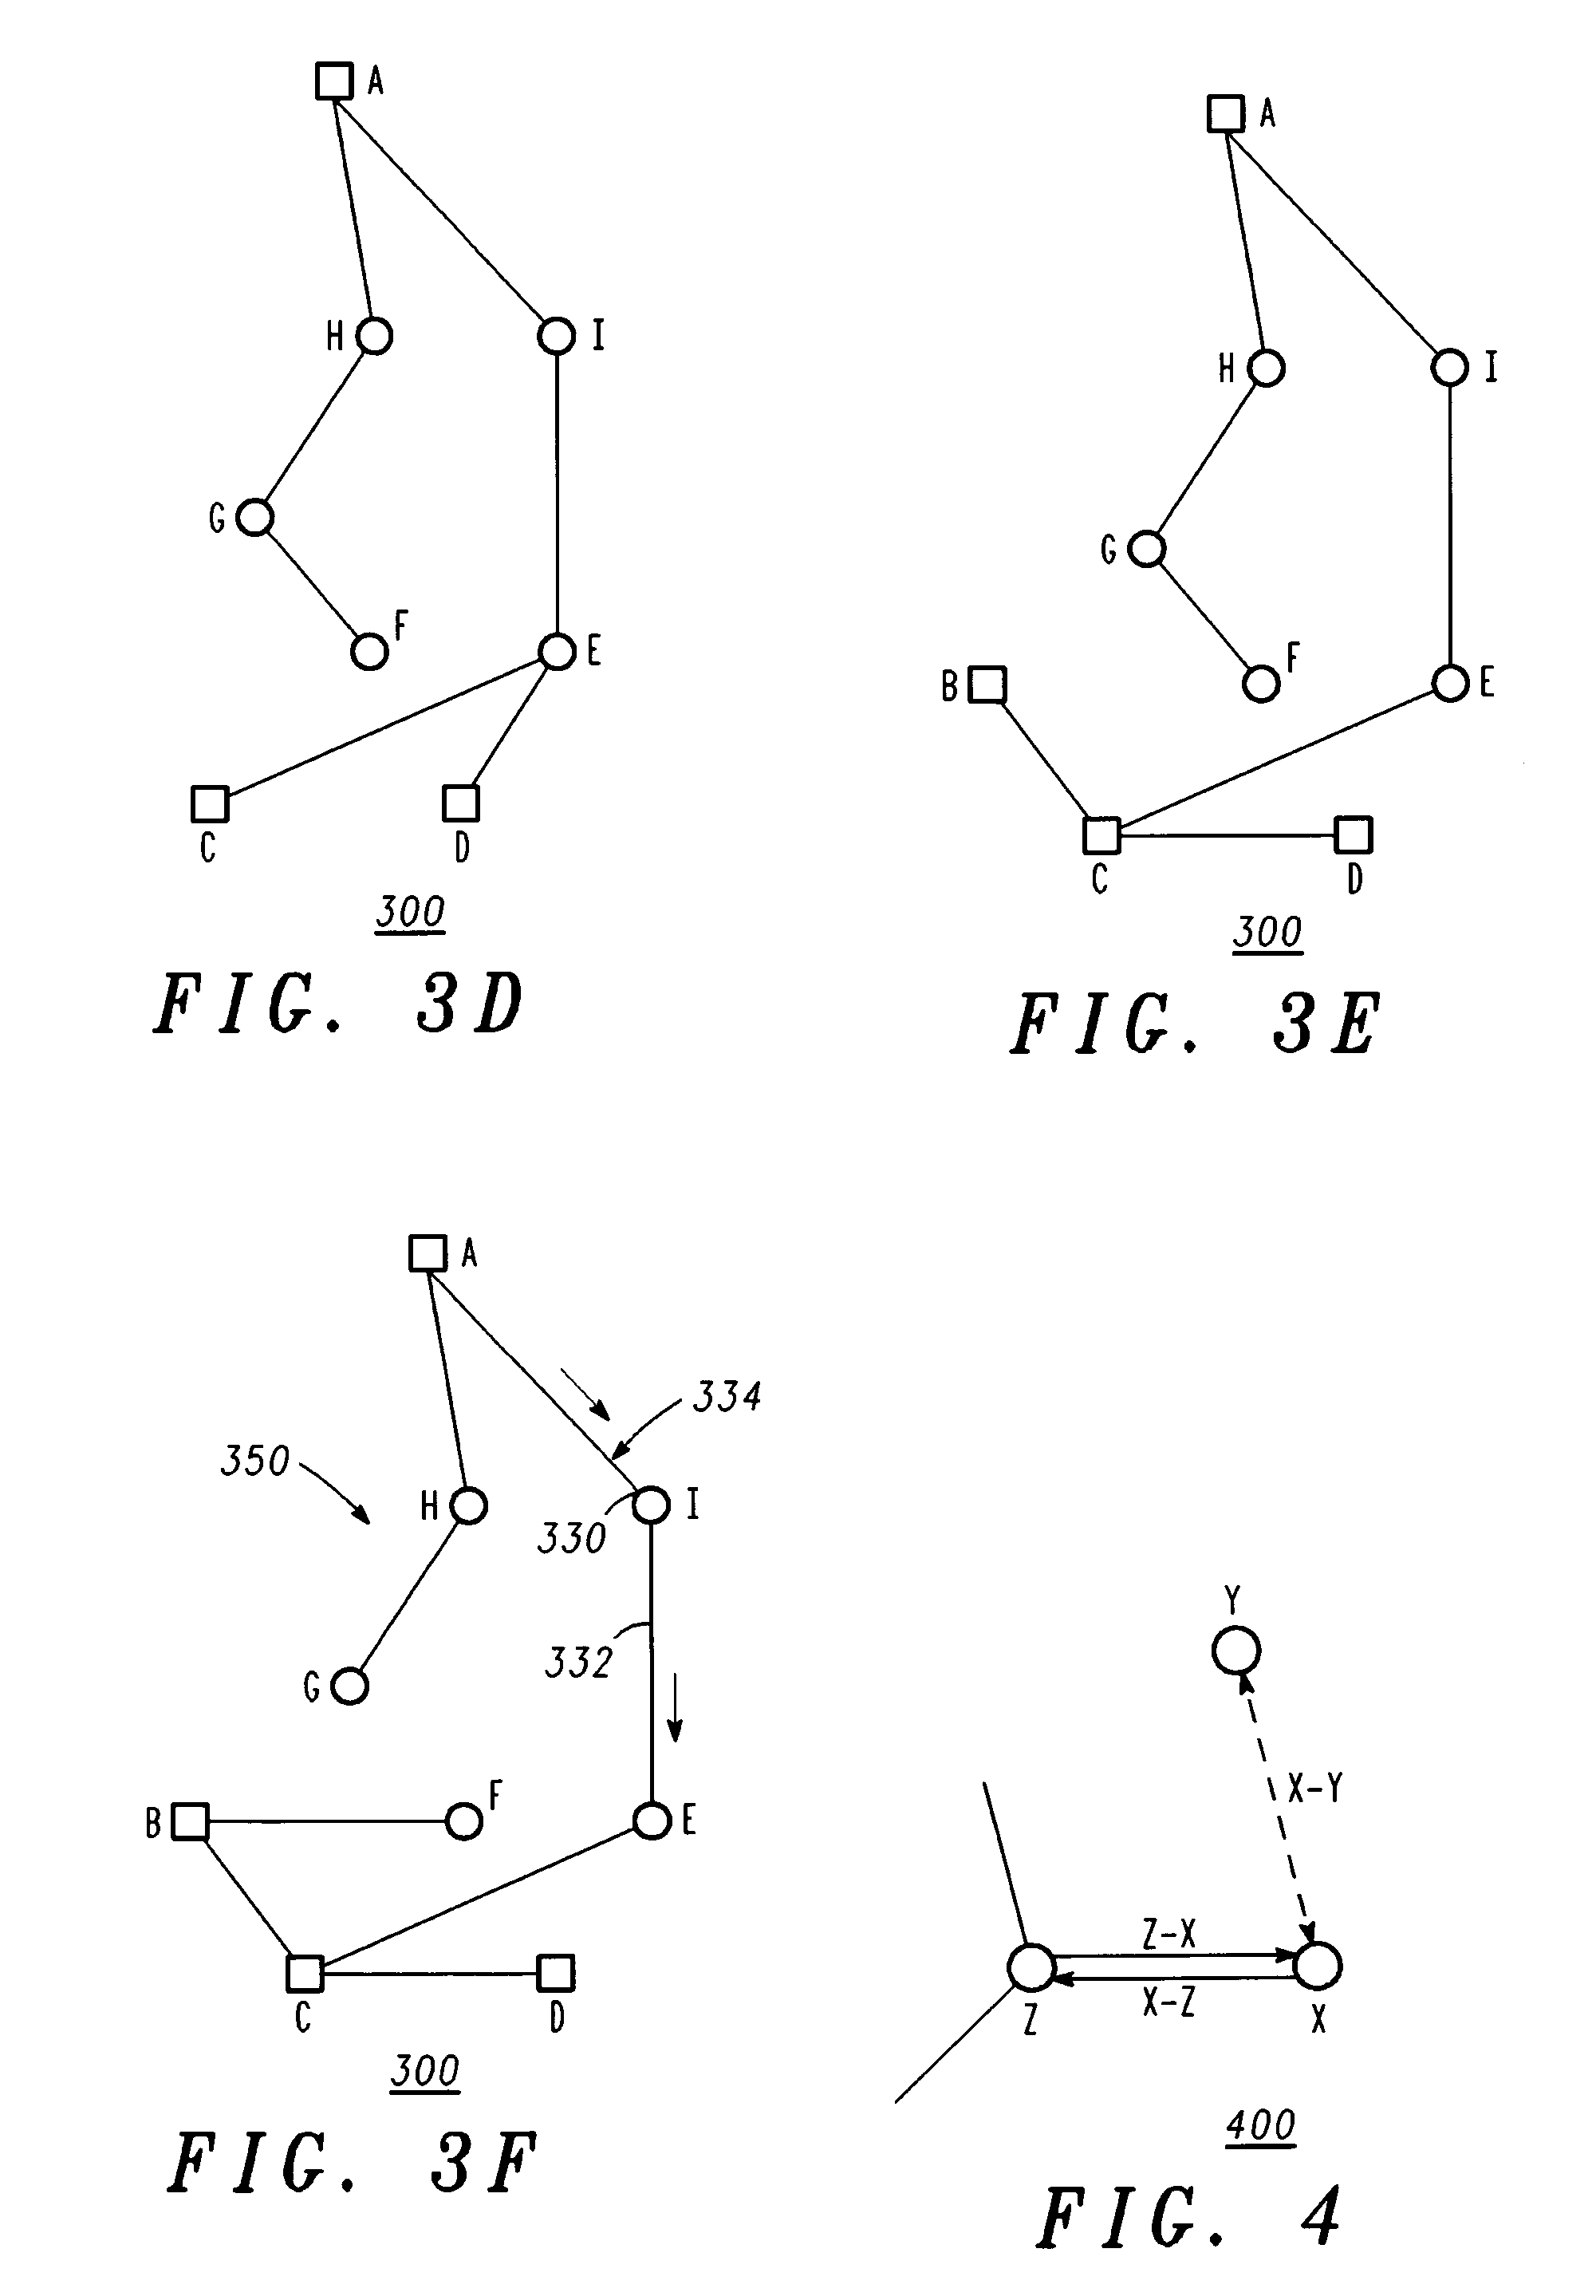 Method and apparatus for generating a degree-constrained minimum spanning tree